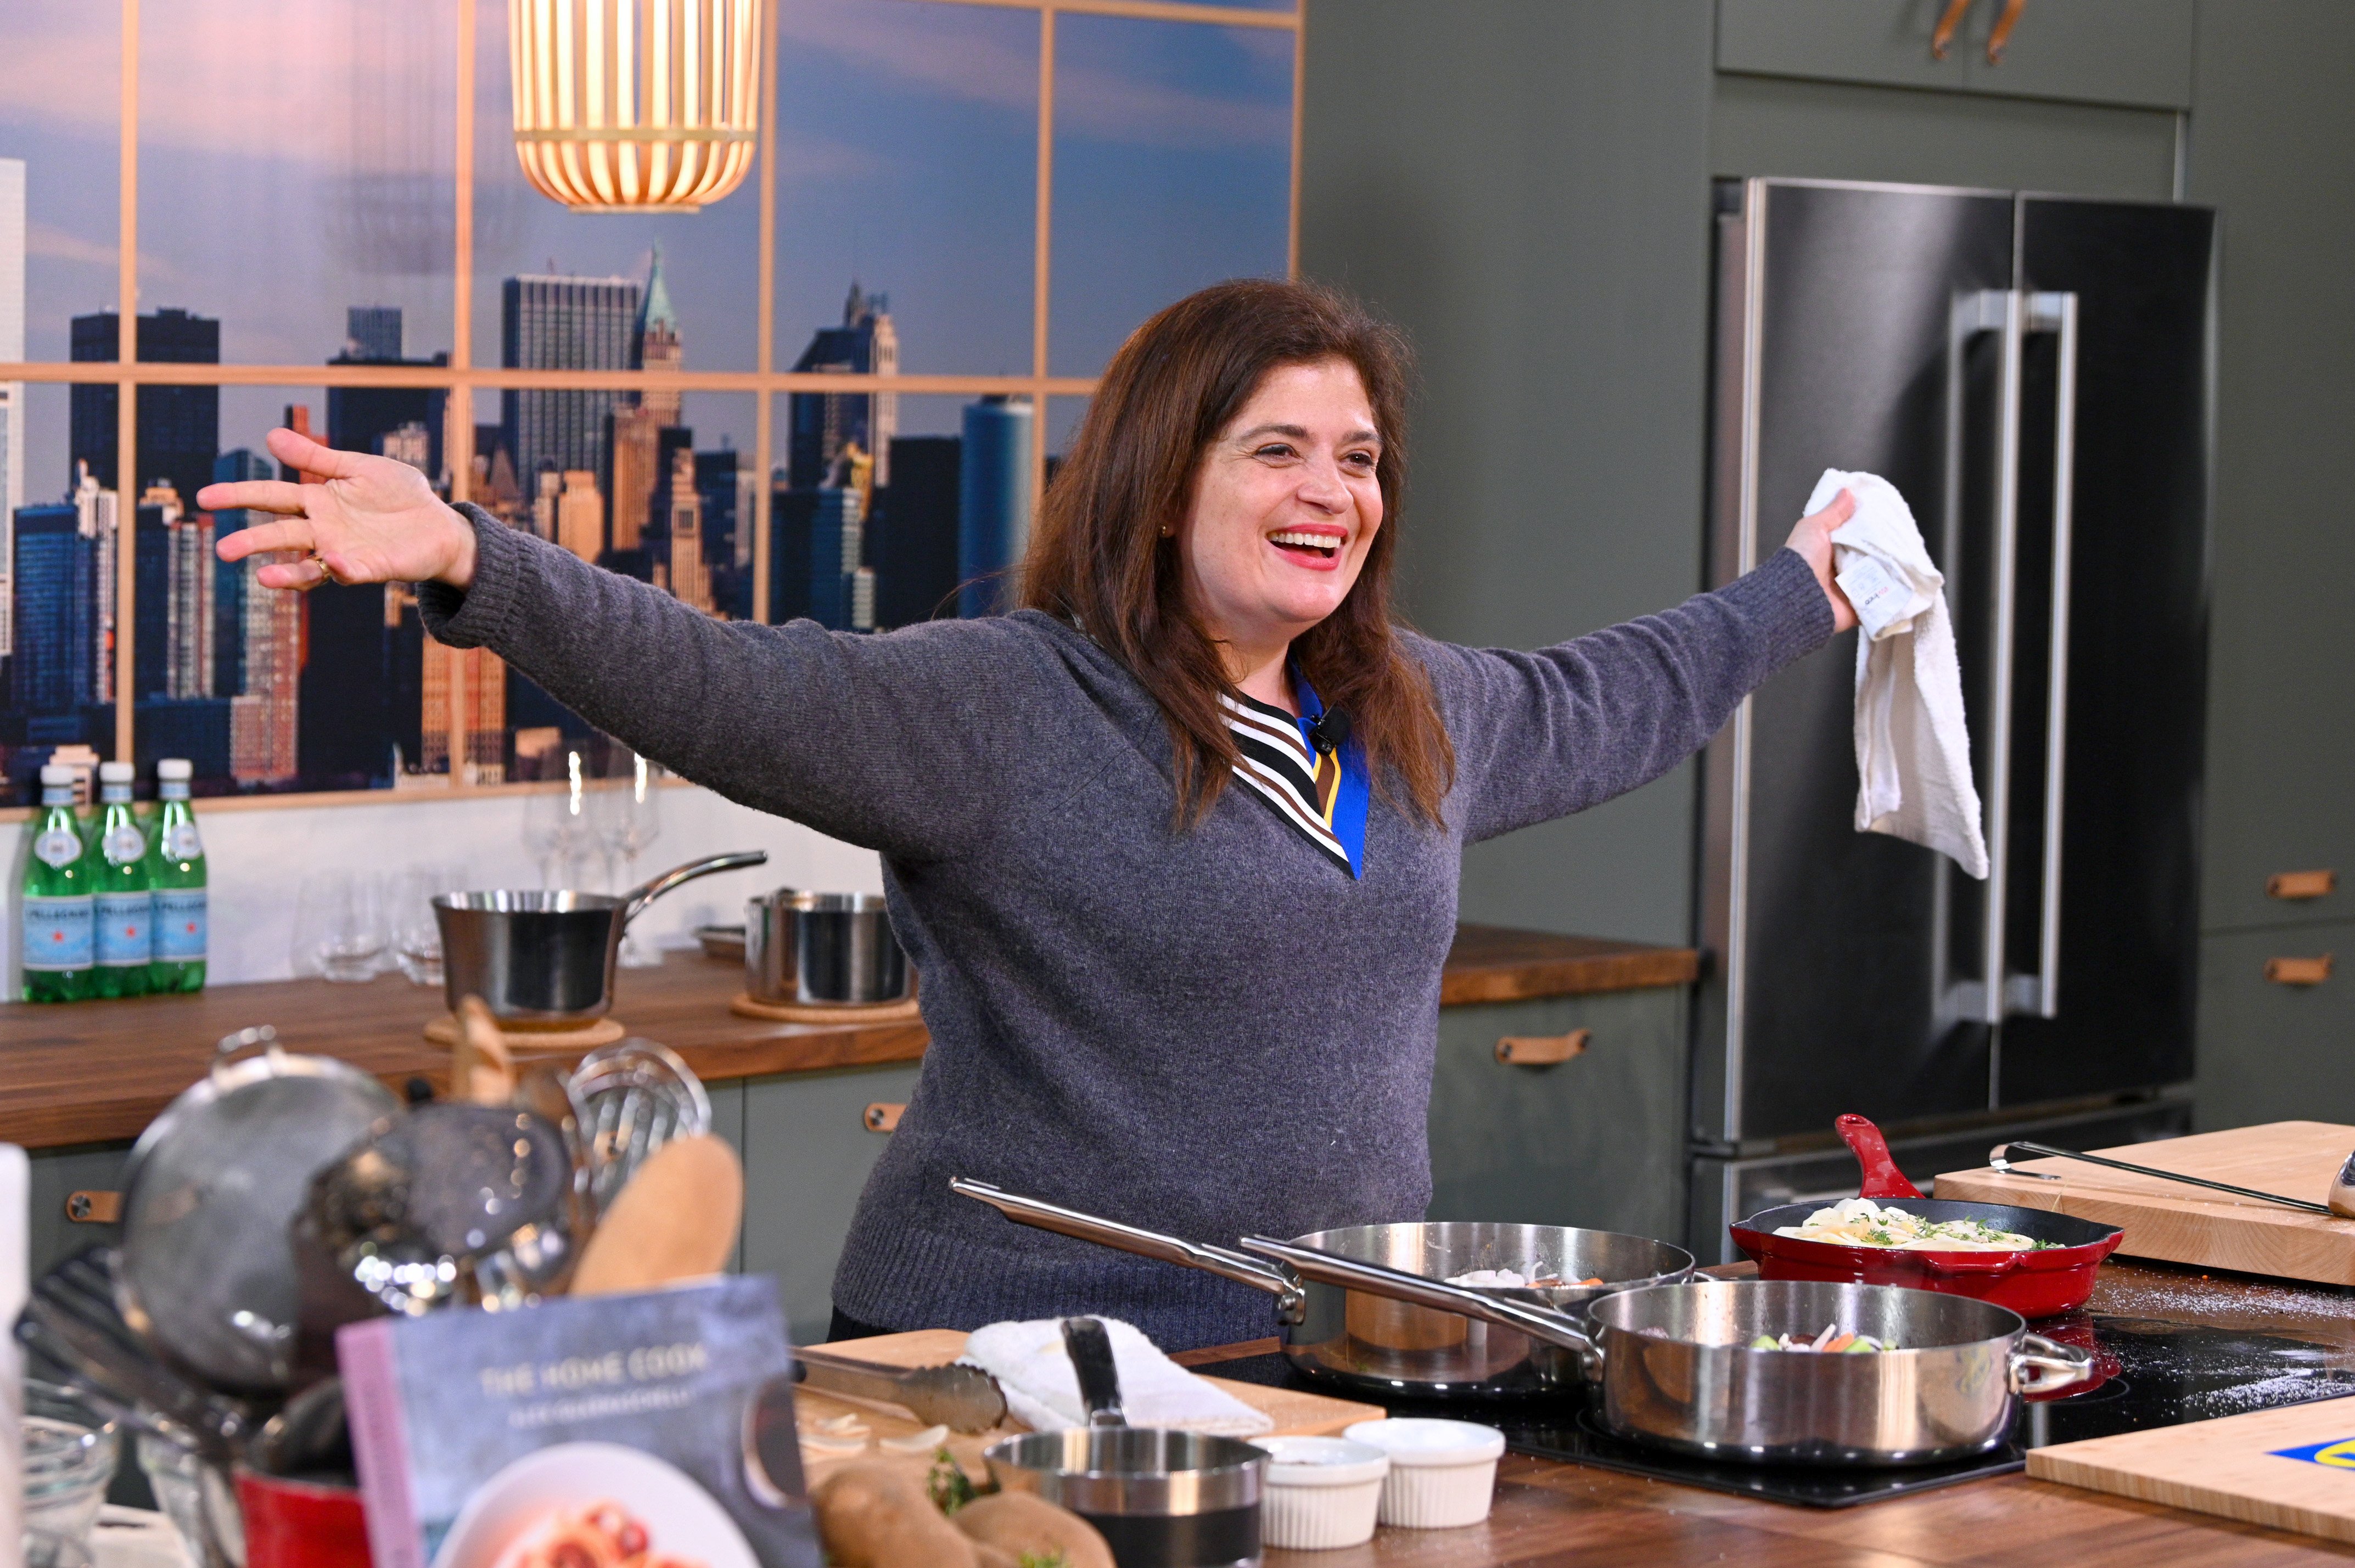 Celebrity chef Alex Guarnaschelli wears a blue v-necked sweater in this photograph.